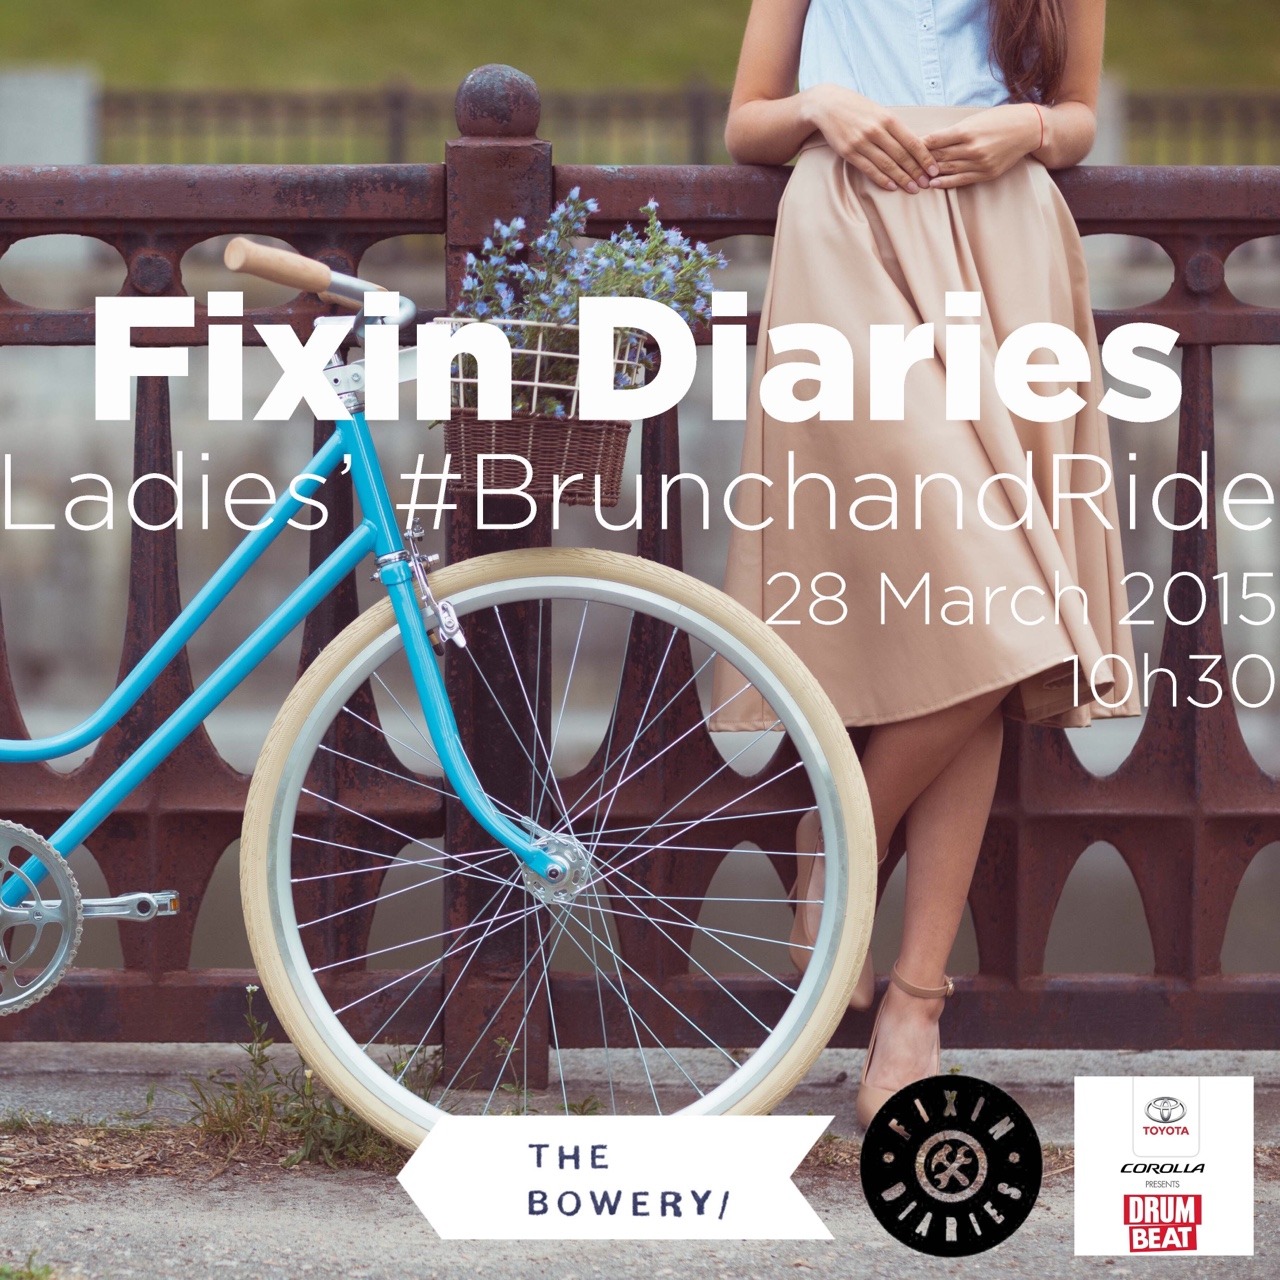 It’s official. The ladies-only #brunchandride is happening. Bring your own bike; there’ll be limited bikes for hire. Food from The Bowery. Learn to ride. And let’s take on the streets of Soweto. End your day in Soweto with the biggest local concert of the year, DRUM Beat. We have discounted tickets for you. Get your tickets here: https://www.quicket.co.za/events/8573-fixin-diaries-ladies39-brunchandride/